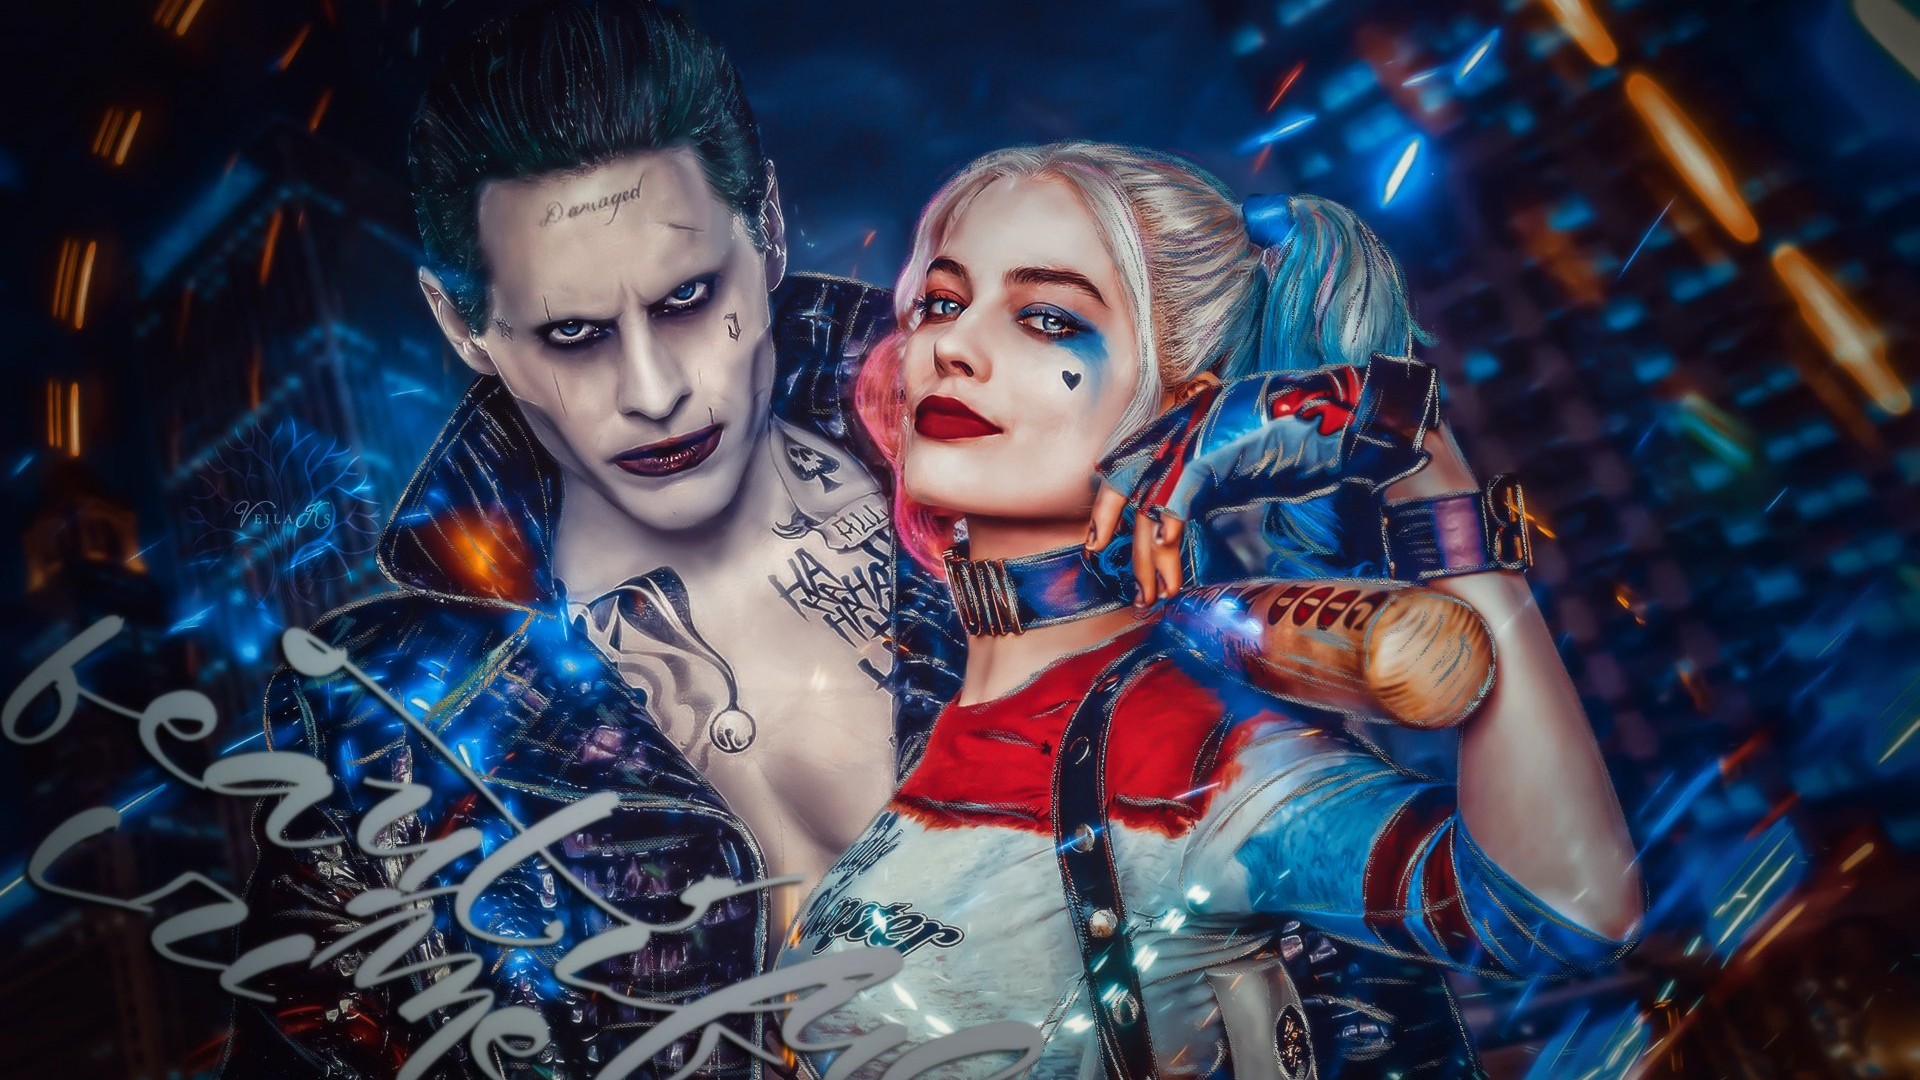 Wallpaper Harley Quinn and Joker Desktop with image resolution 1920x1080 pixel. You can use this wallpaper as background for your desktop Computer Screensavers, Android or iPhone smartphones